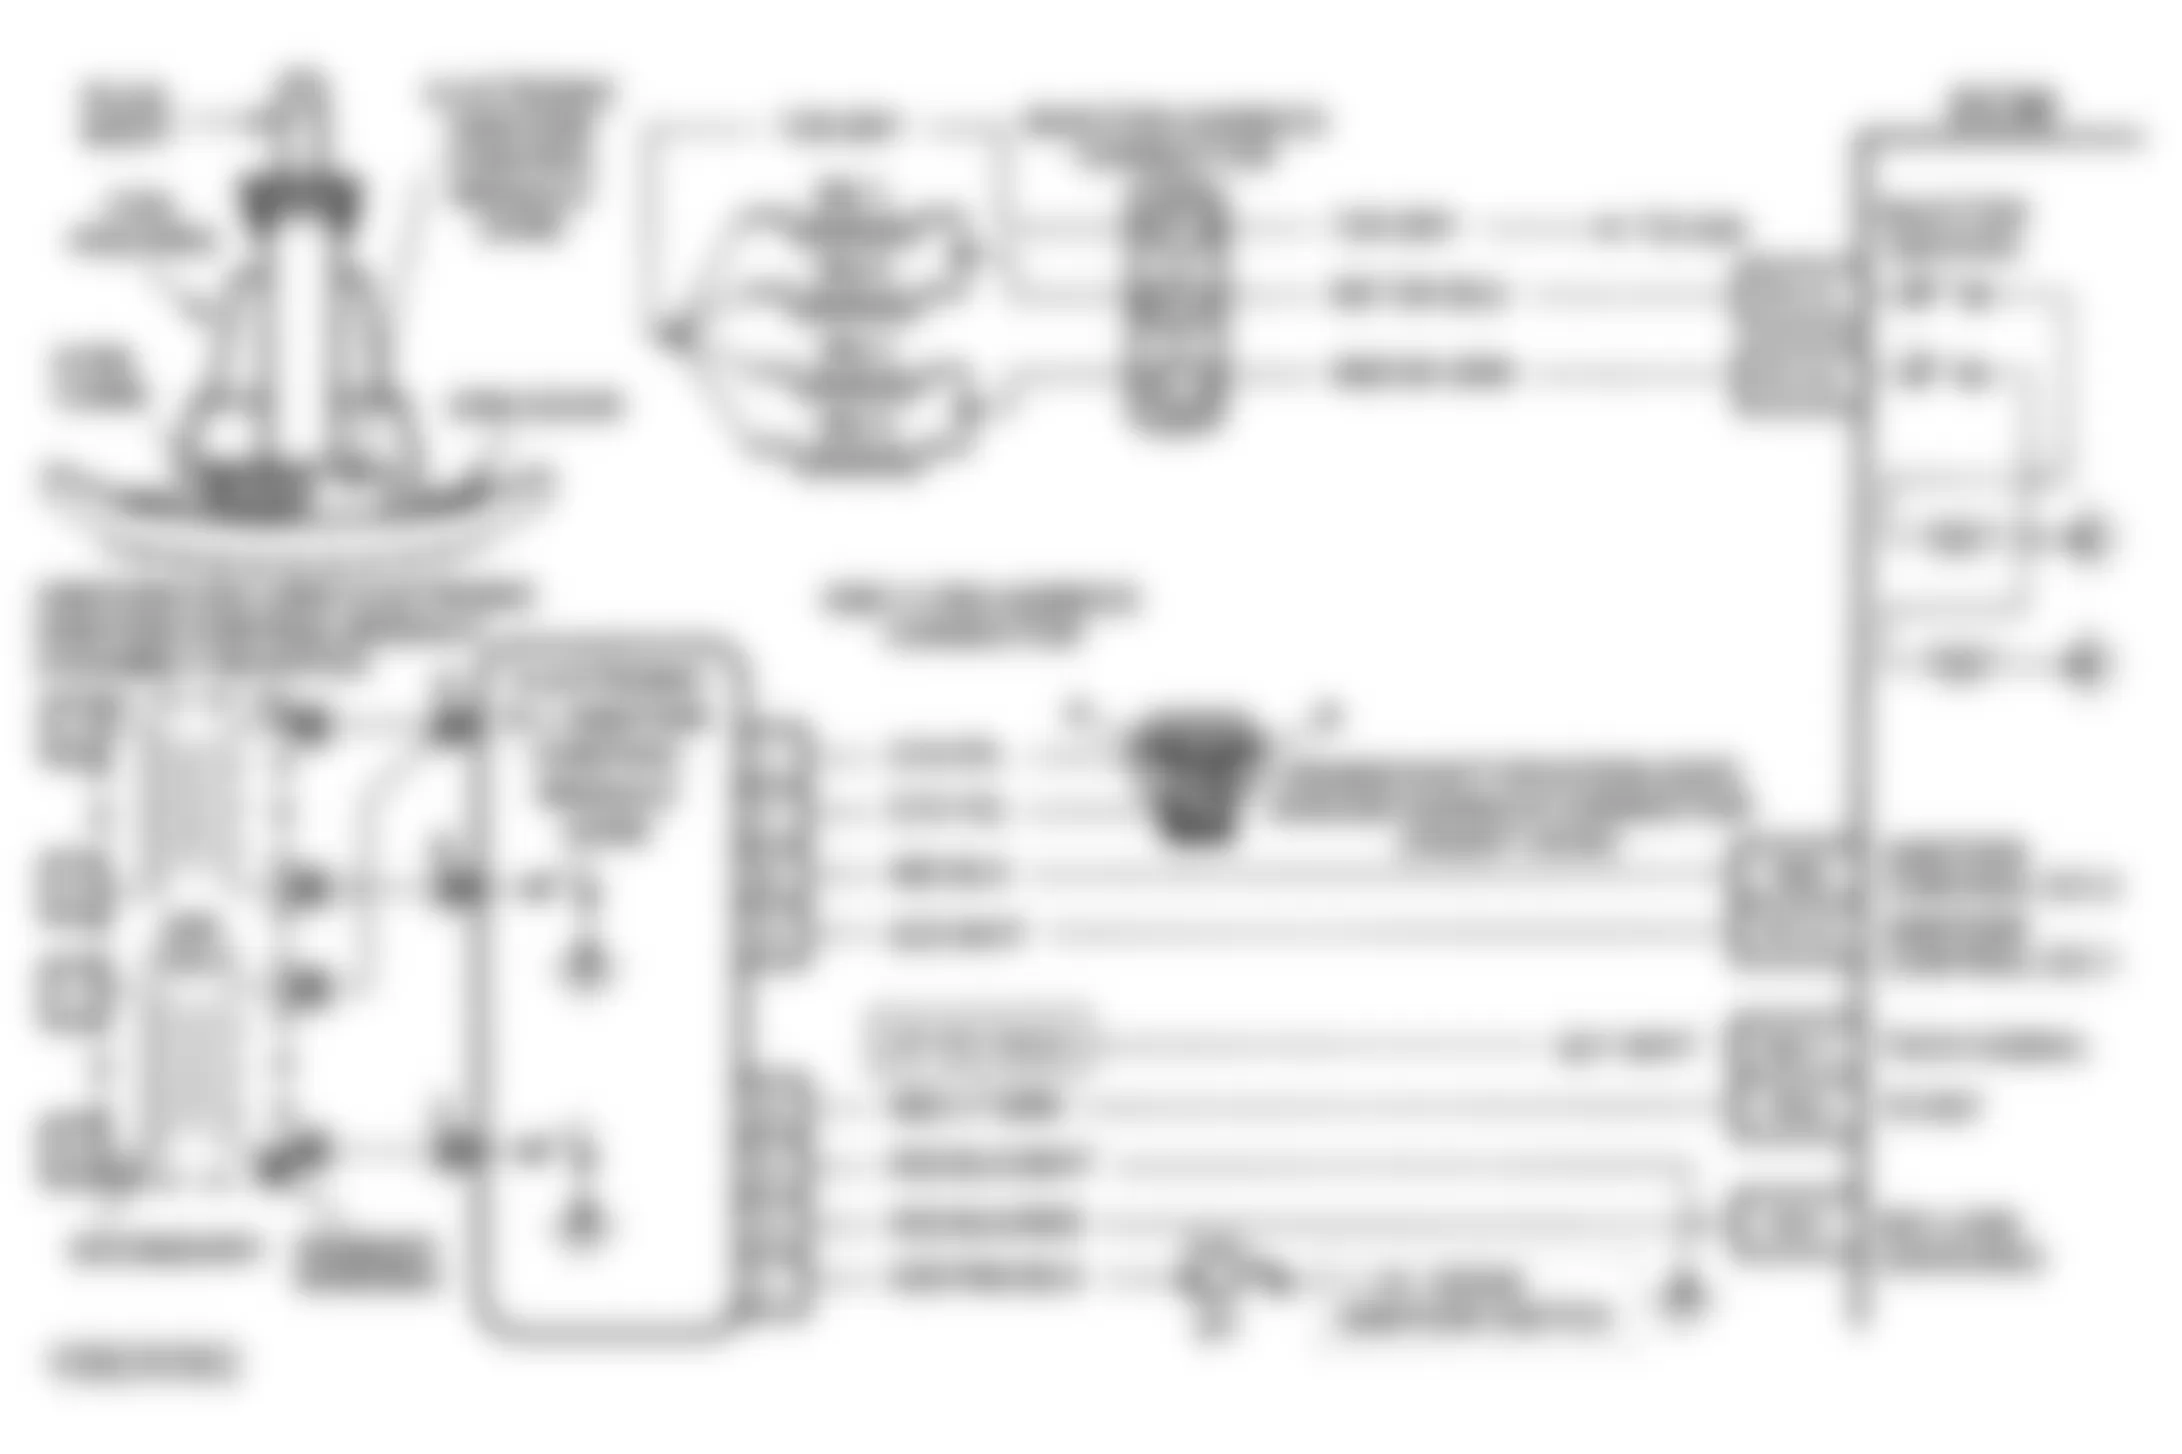 Buick Skylark Custom 1993 - Component Locations -  Code 16 Schematic (2.3L L Body) Missing 2X Reference Circuit